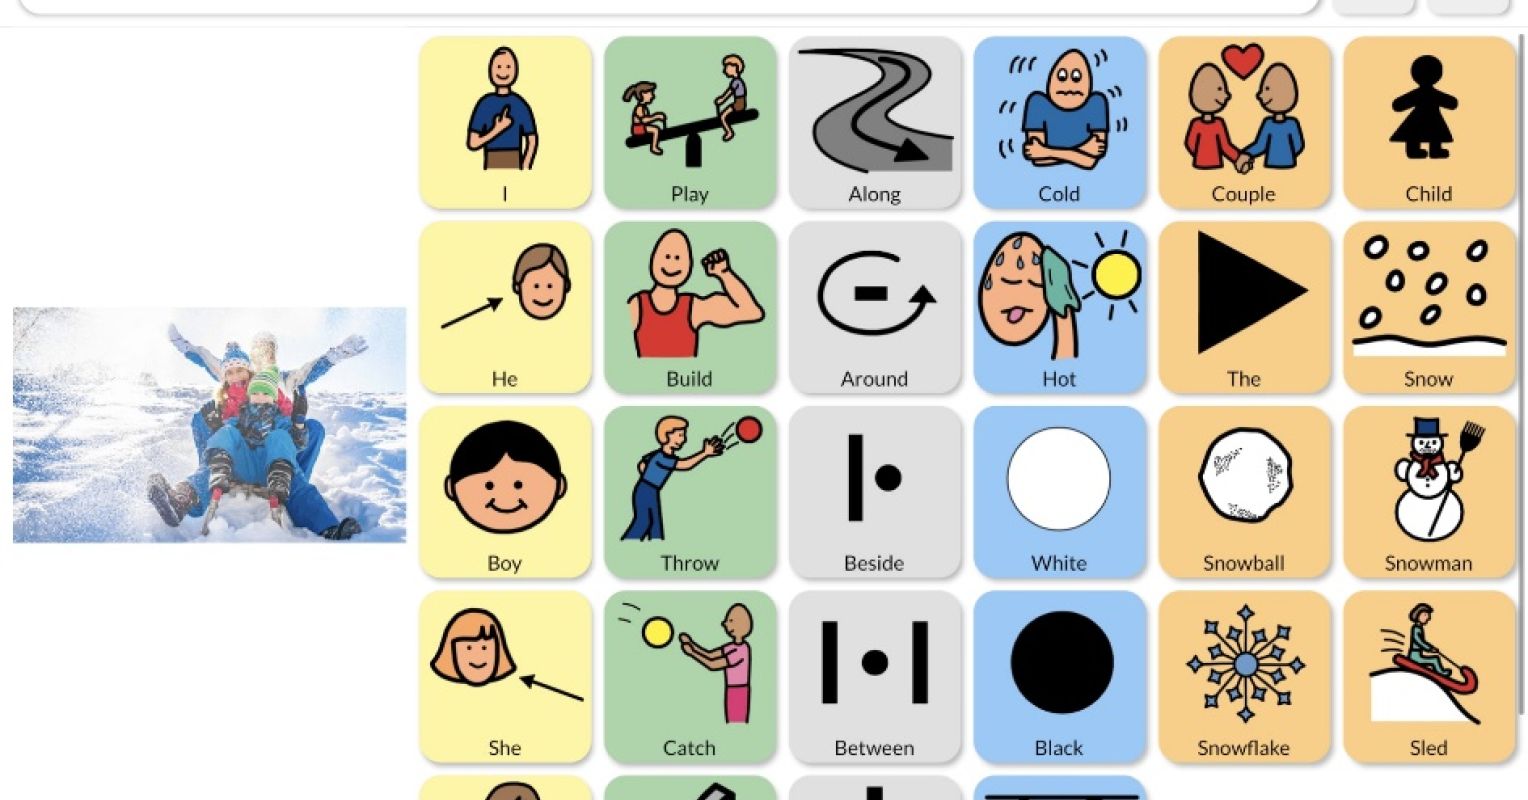 Autism App Targets the "Holy Grail" of Communication